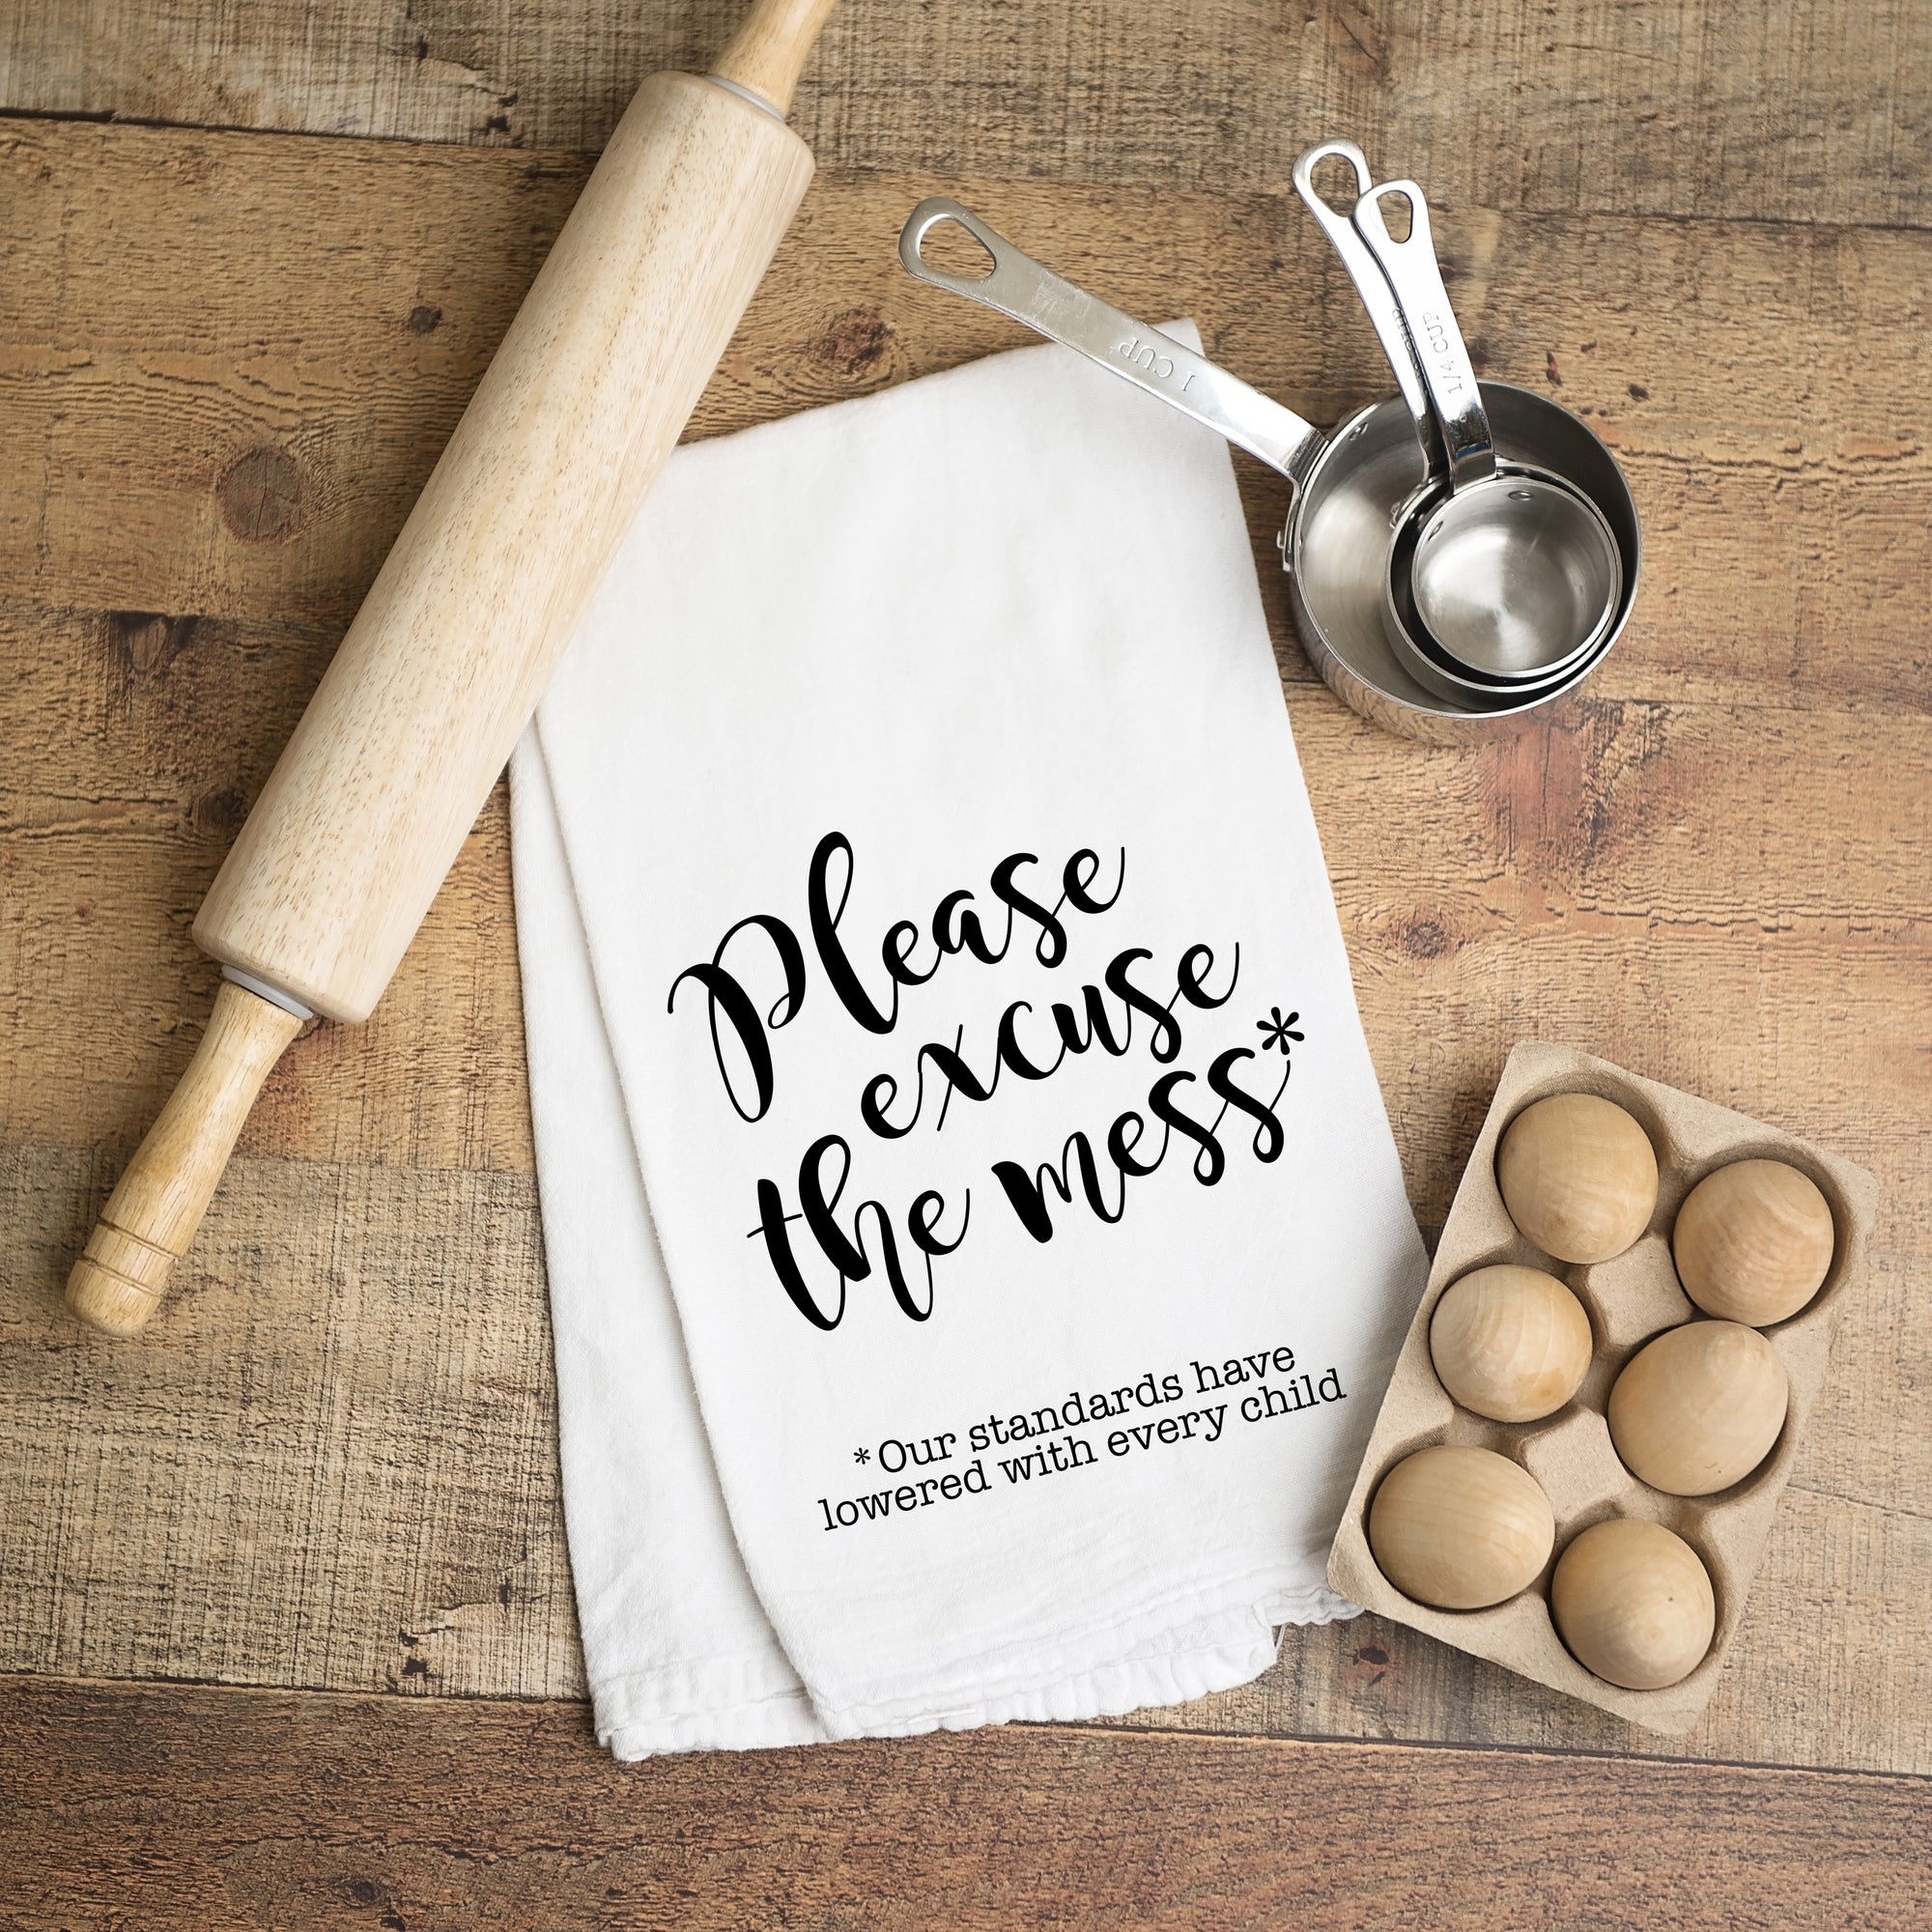 Tea Towel: Please excuse the mess, or standards have lowered with every child" Pipsy.com